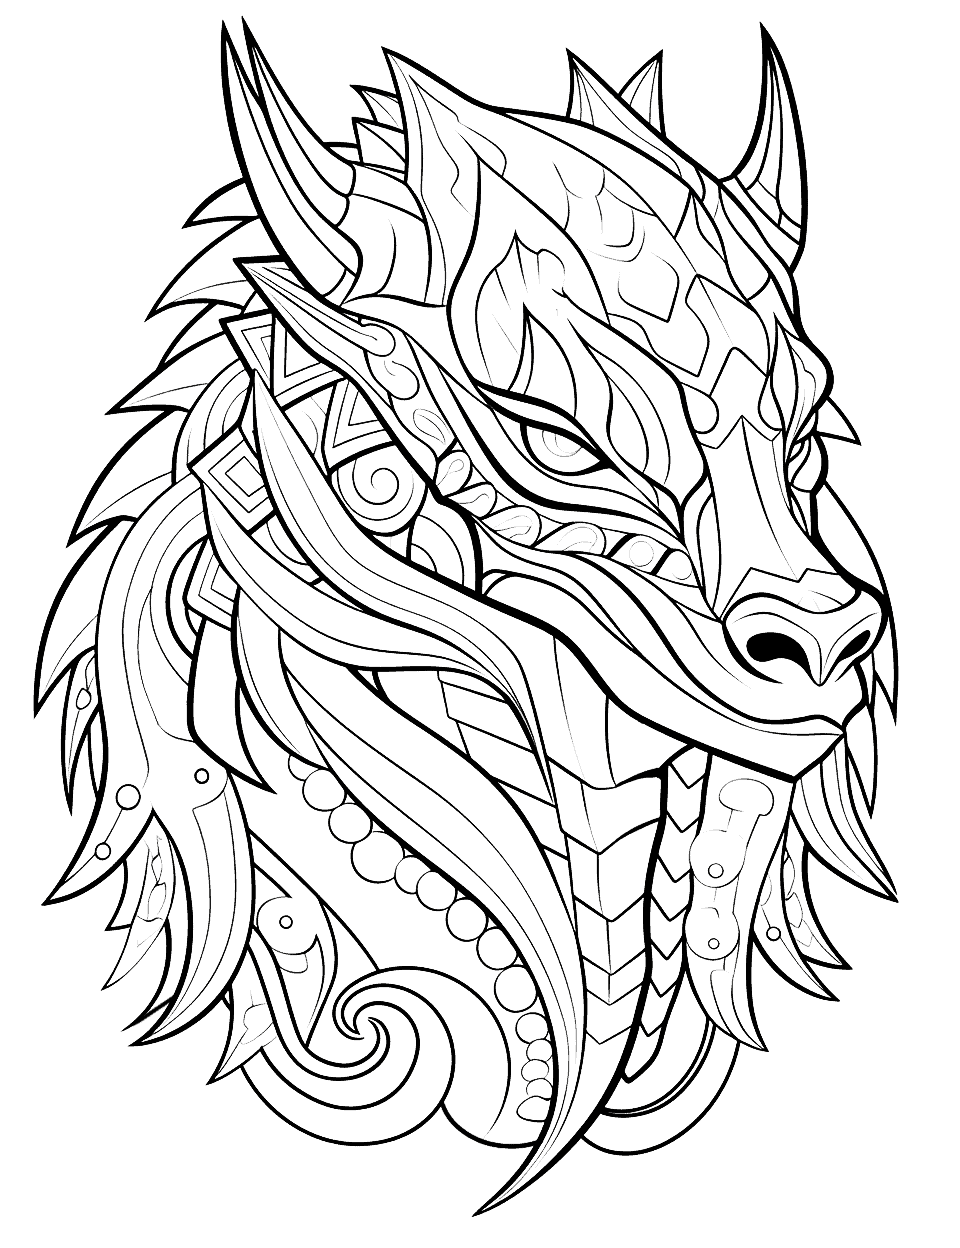 Abstract Dragon Art Adult Coloring Page - An abstract interpretation of a dragon created with geometric shapes and intricate patterns.